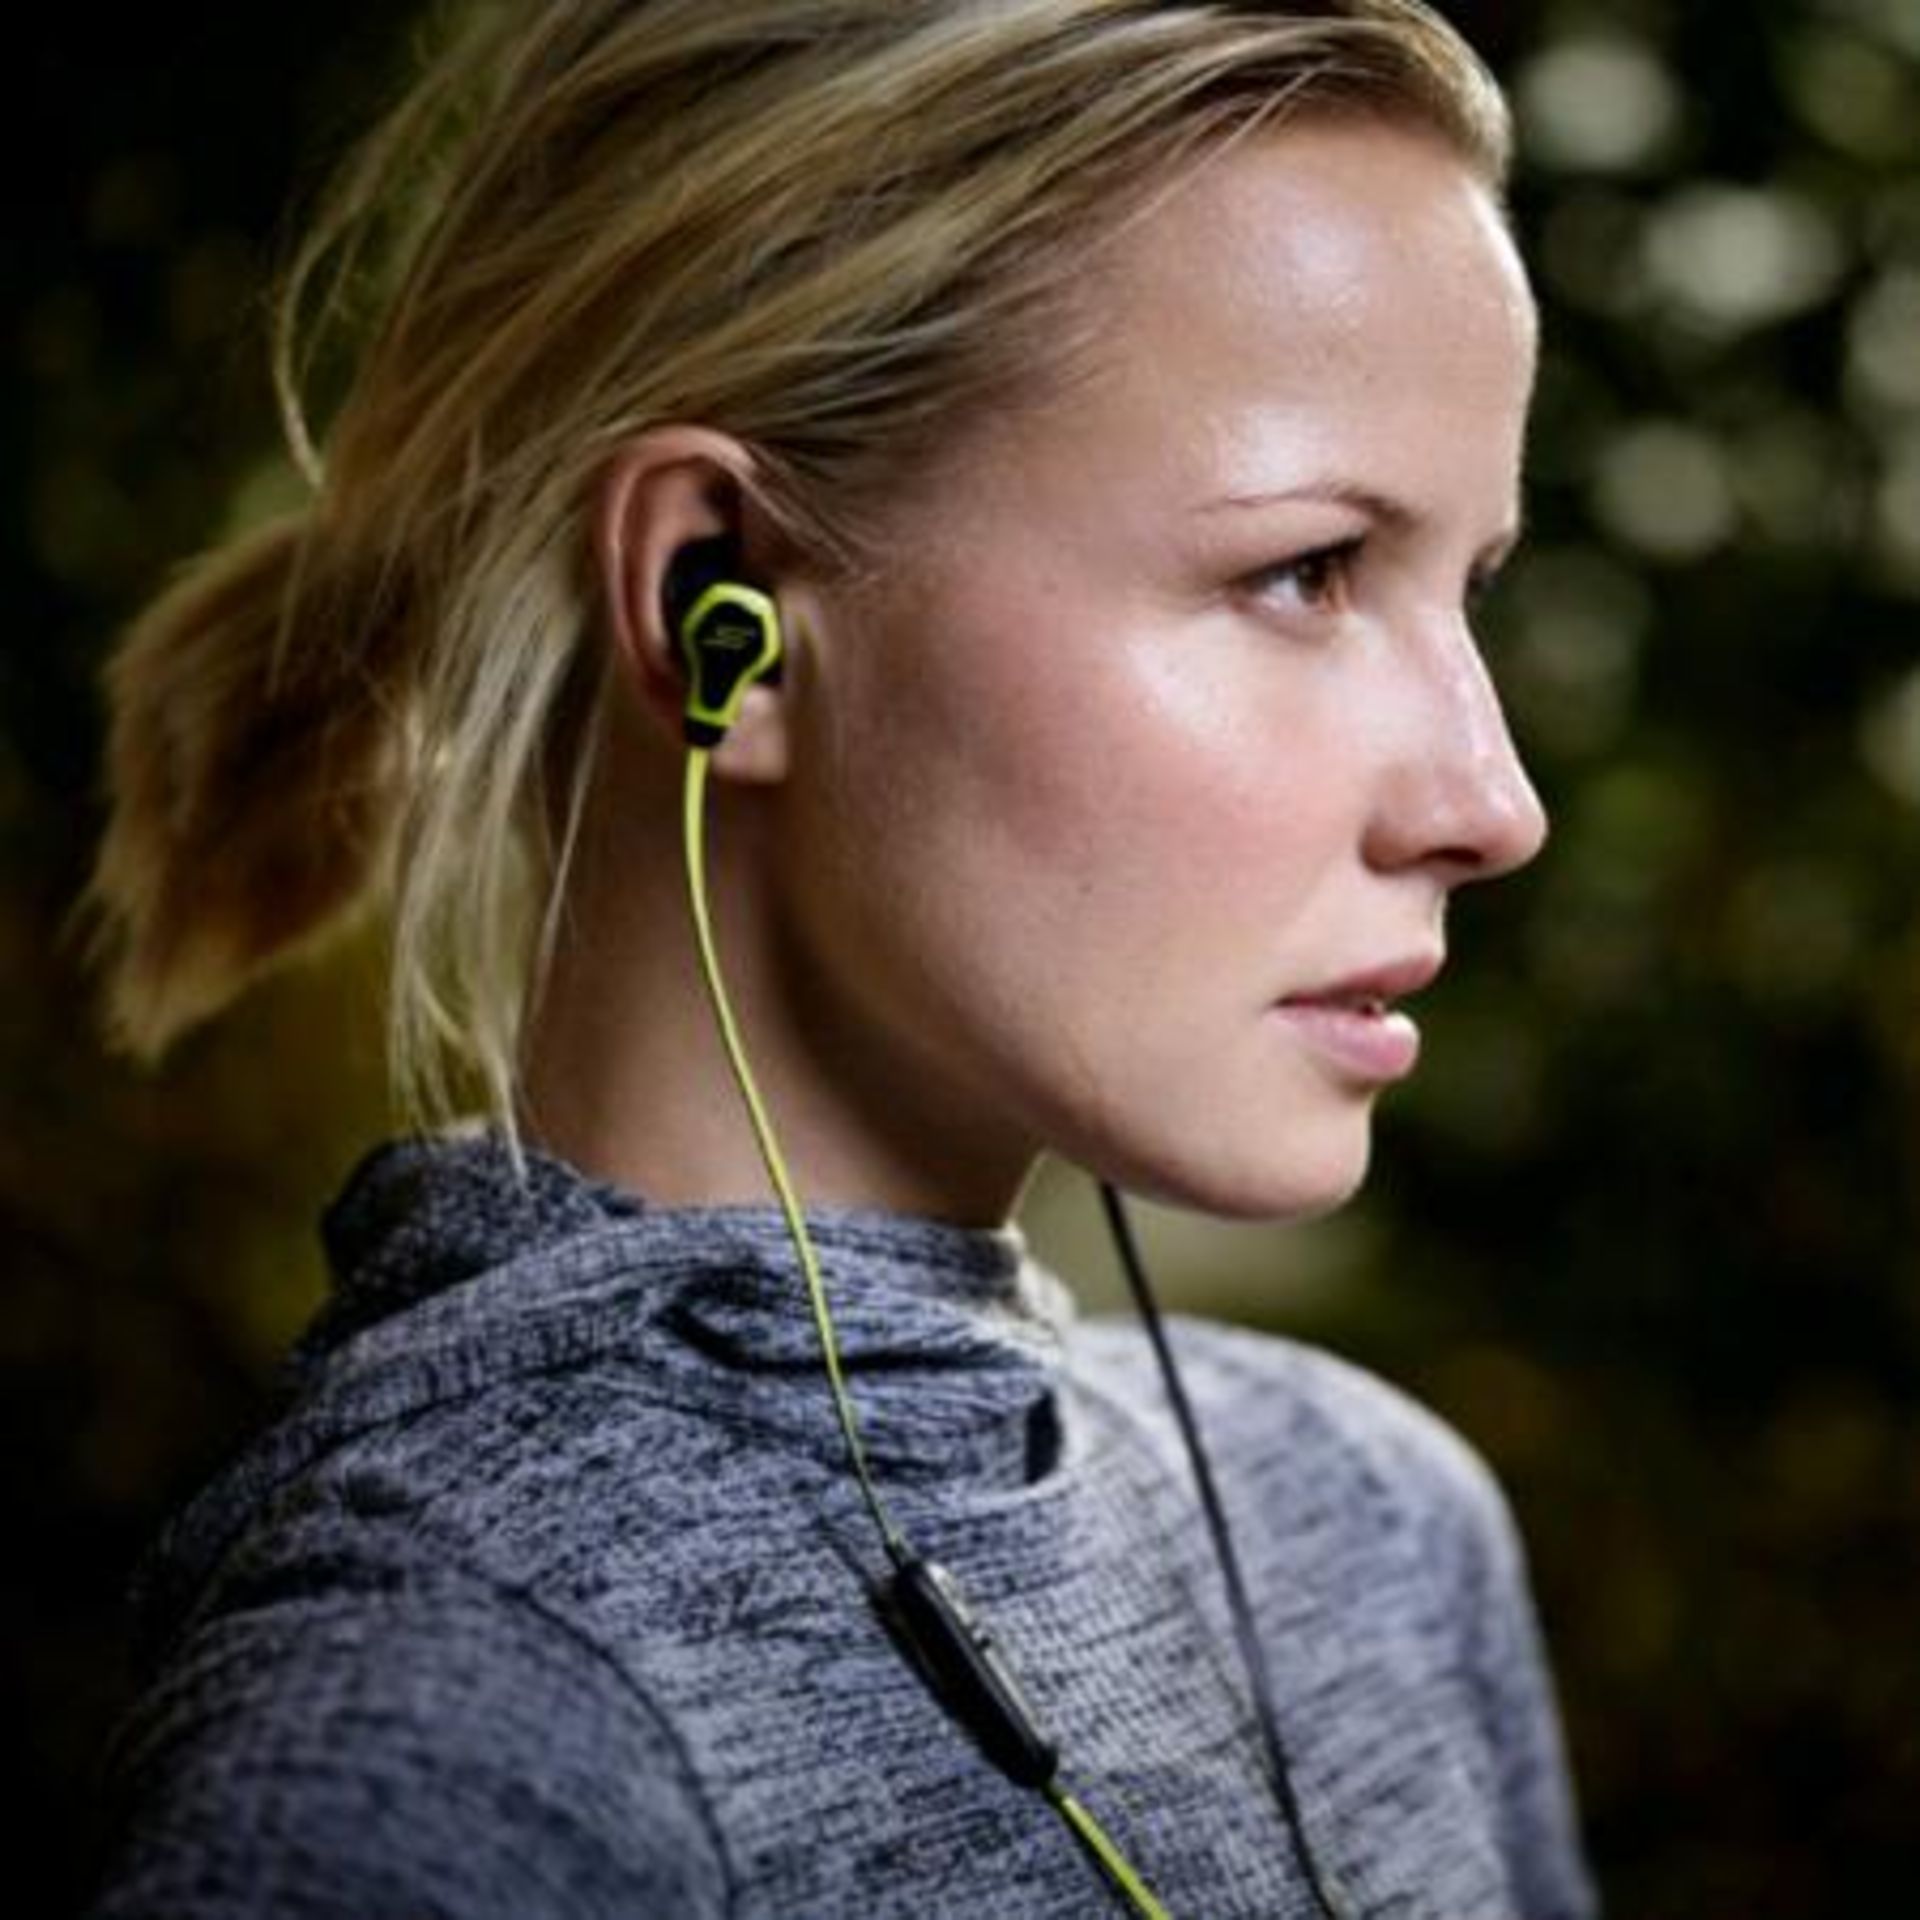 V *TRADE QTY* Brand New SMS Audio BioSport Earphones - Heart Rate Monitor Measures Changes In - Image 3 of 3